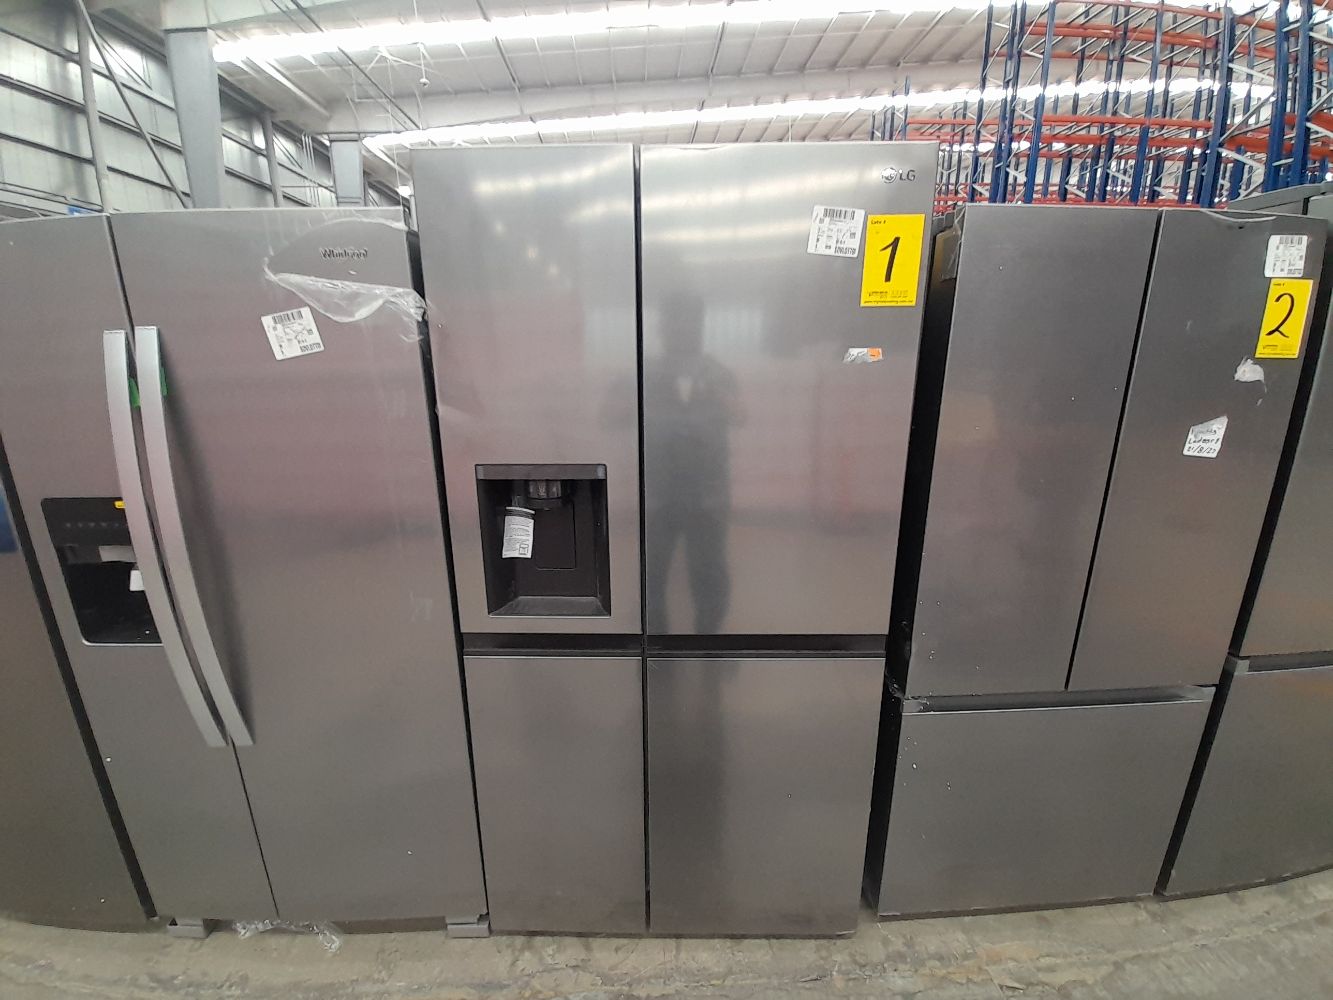 Returns & Exchange Auction - Refrigerators, Freezers, Cooktops, Ovens, Stovetops, Furniture, Mattresses, Washers & Dryers